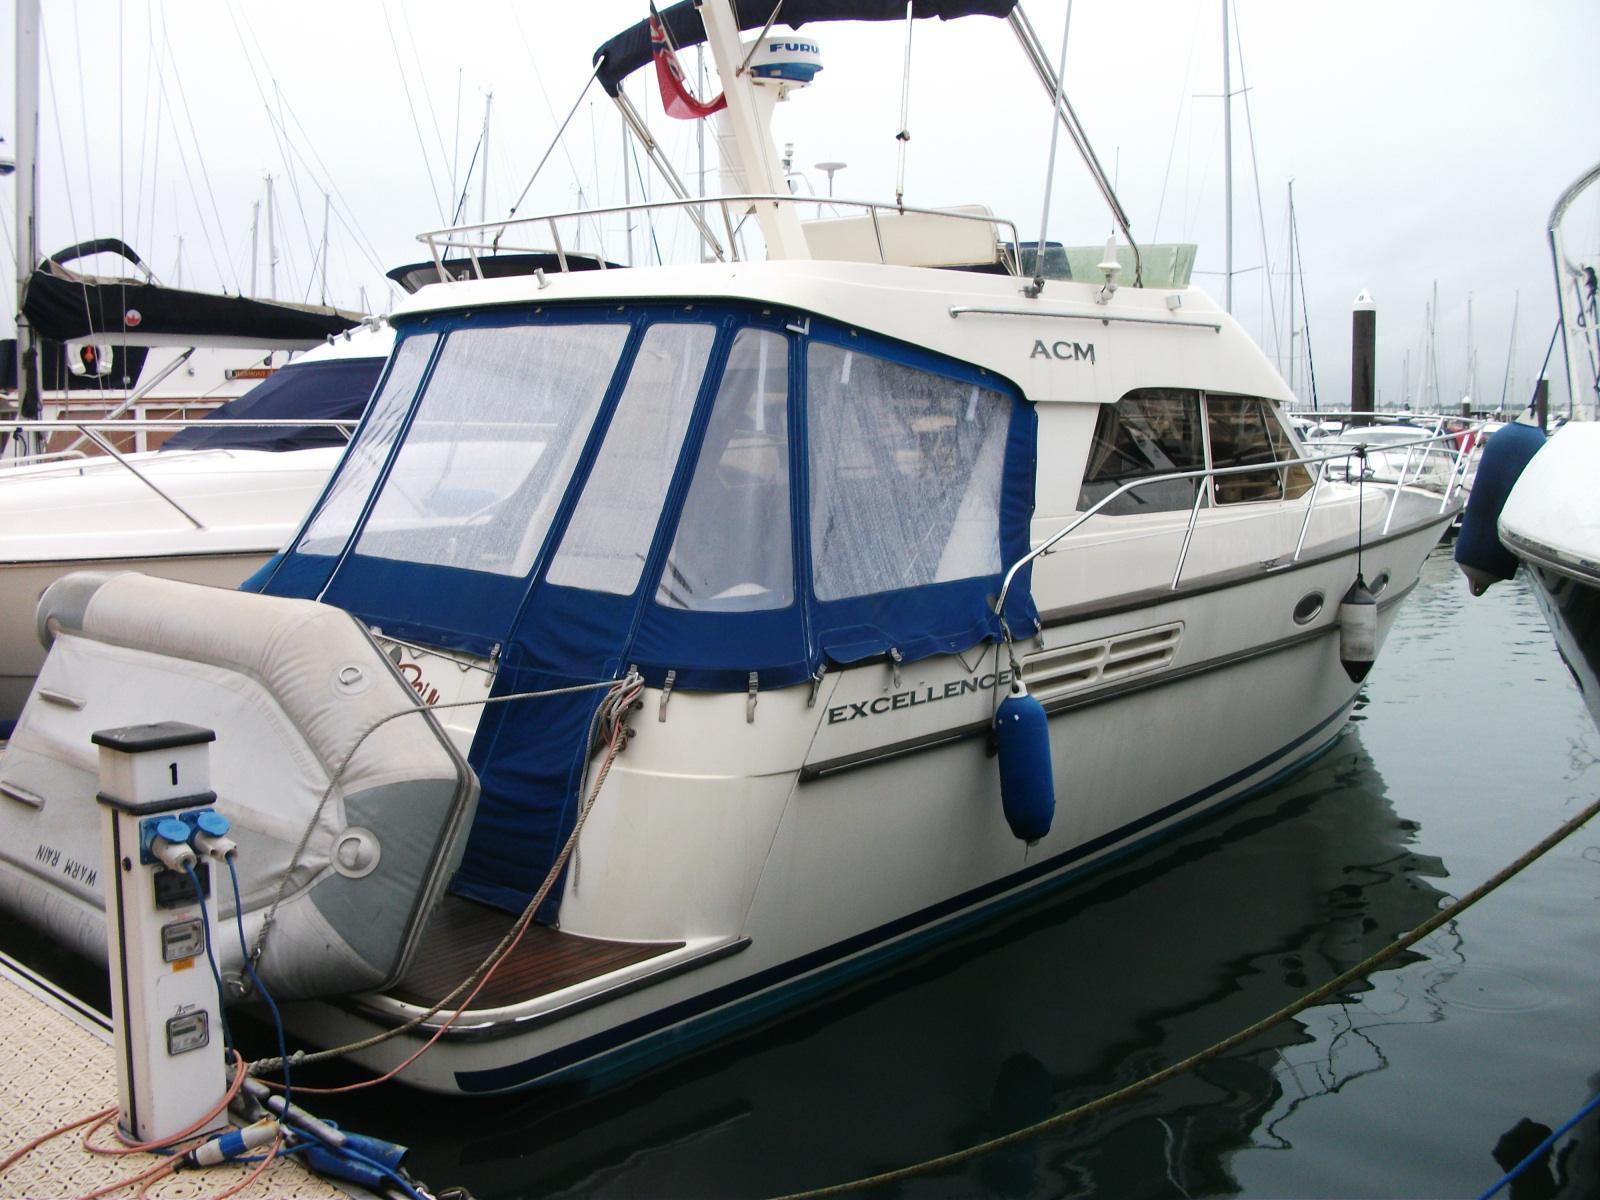 ACM Excellence 38, Channel Islands